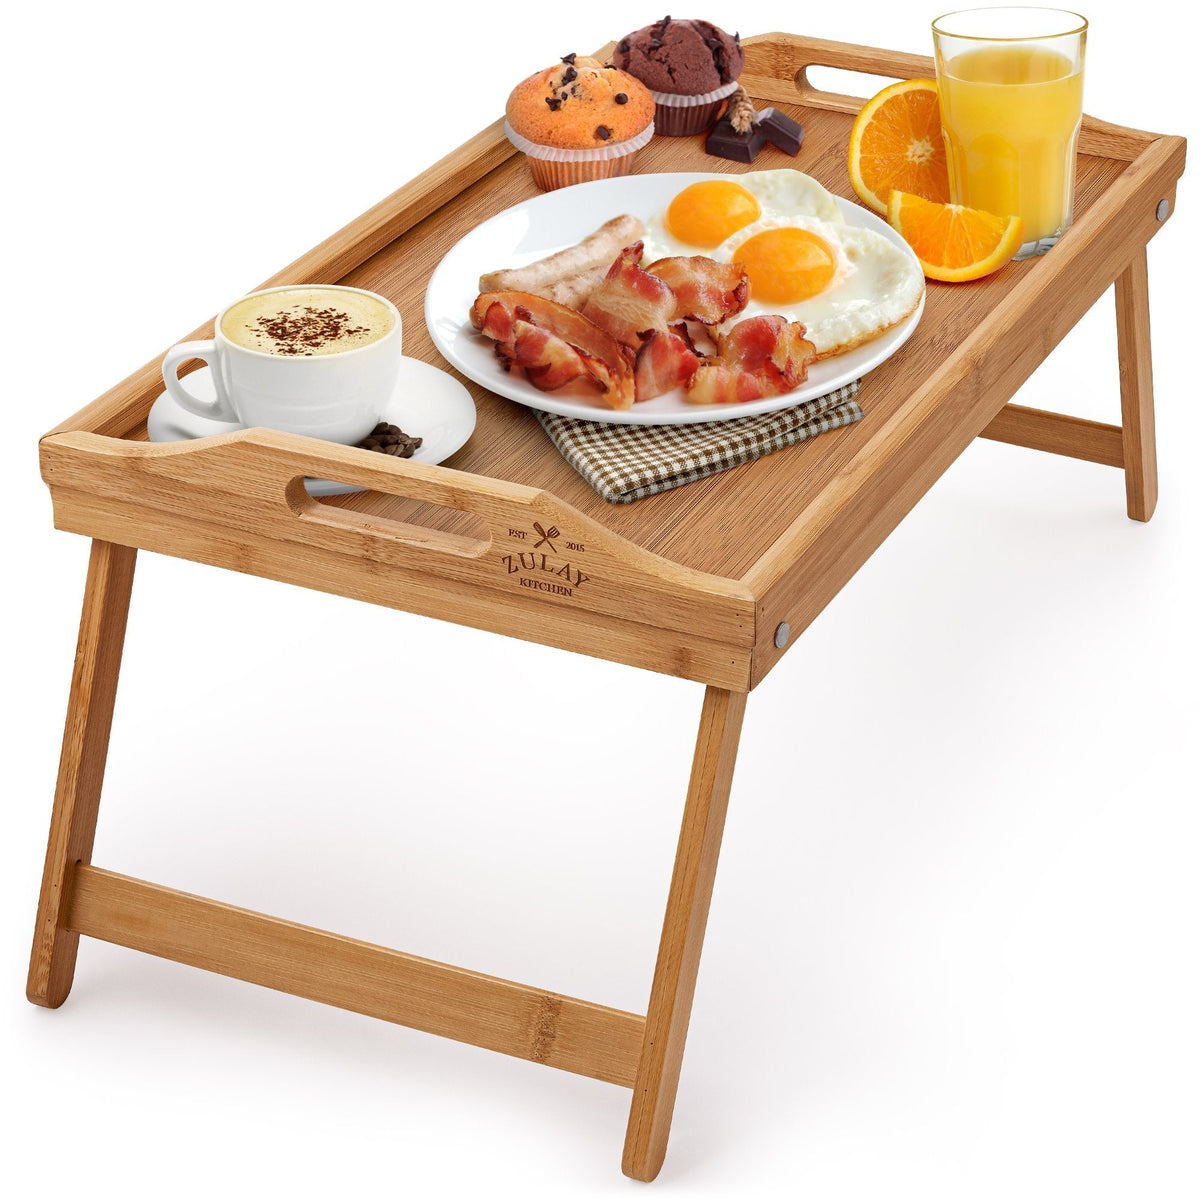 ZHUOYUE Zhuoyue Bamboo Bed Tray Table - Lap Tray Table for